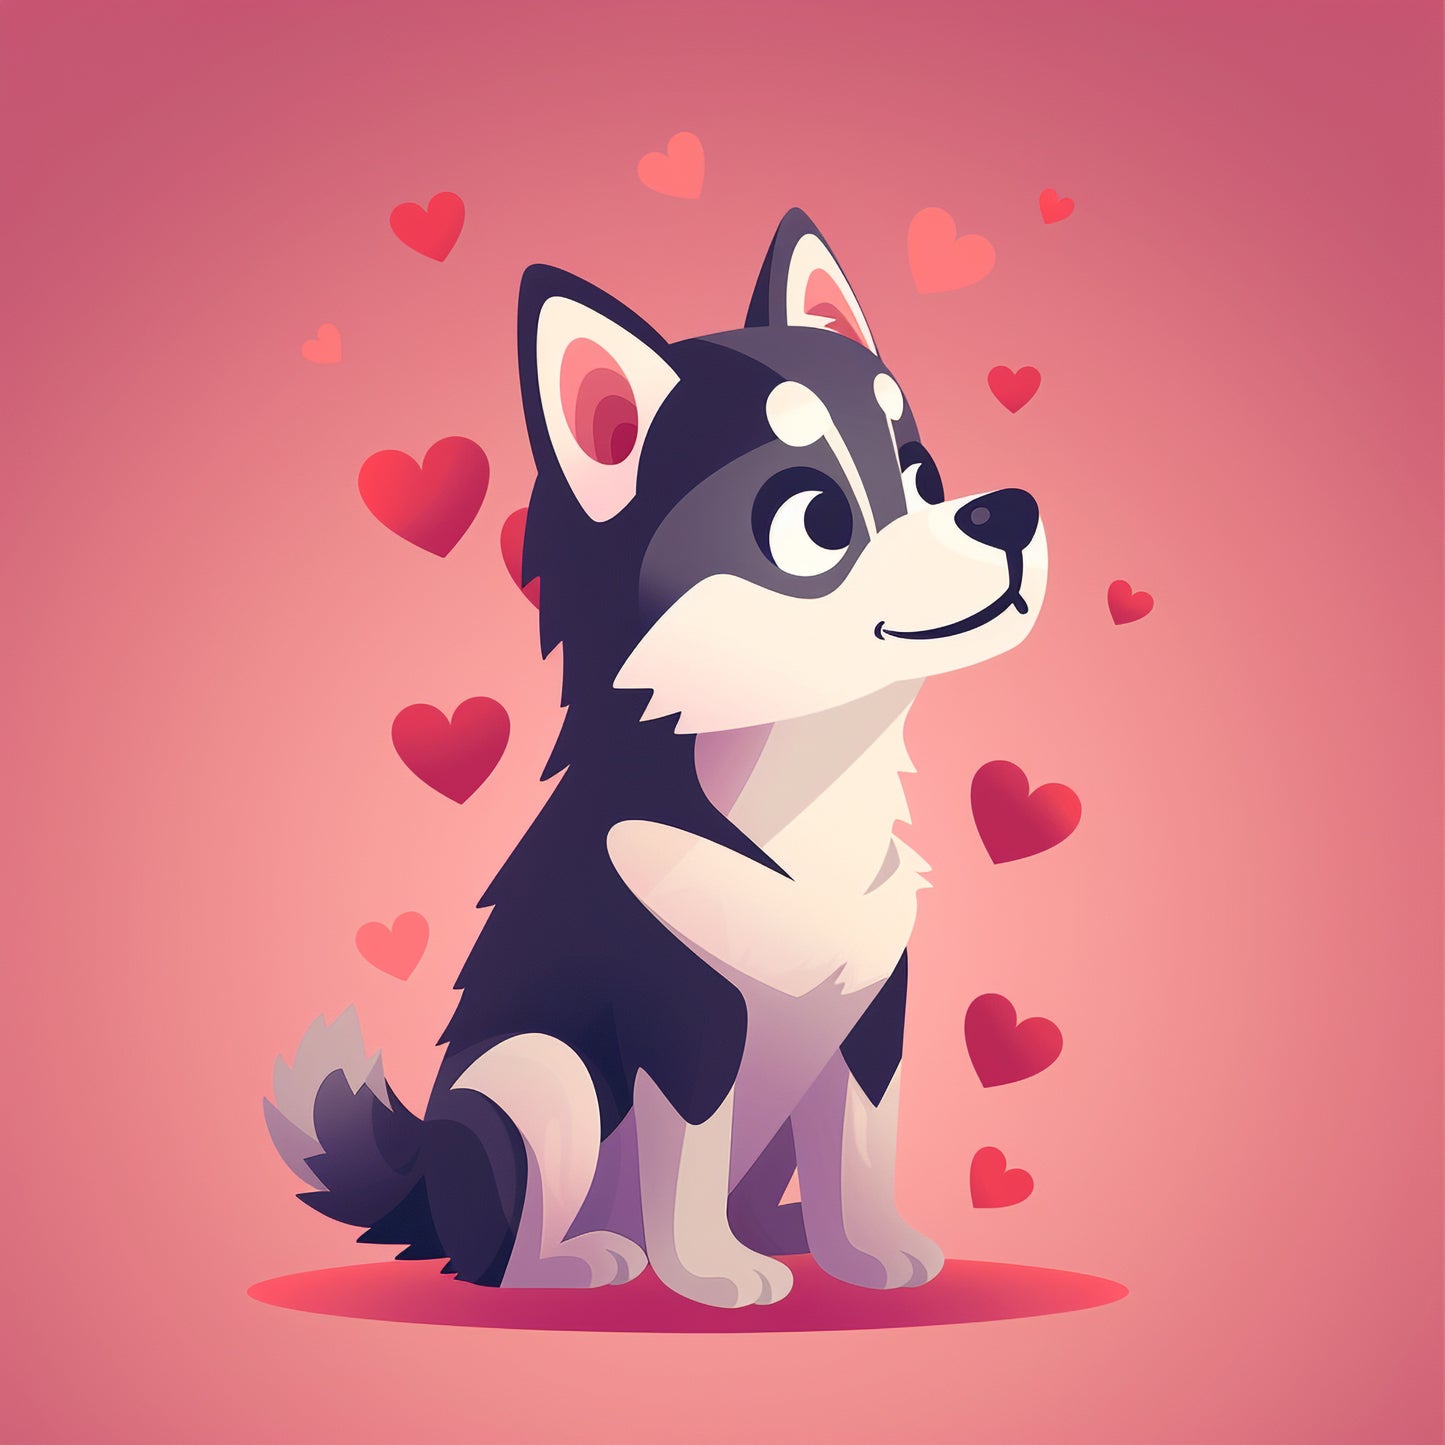 Adorable Husky Puppy Surrounded by Floating Hearts